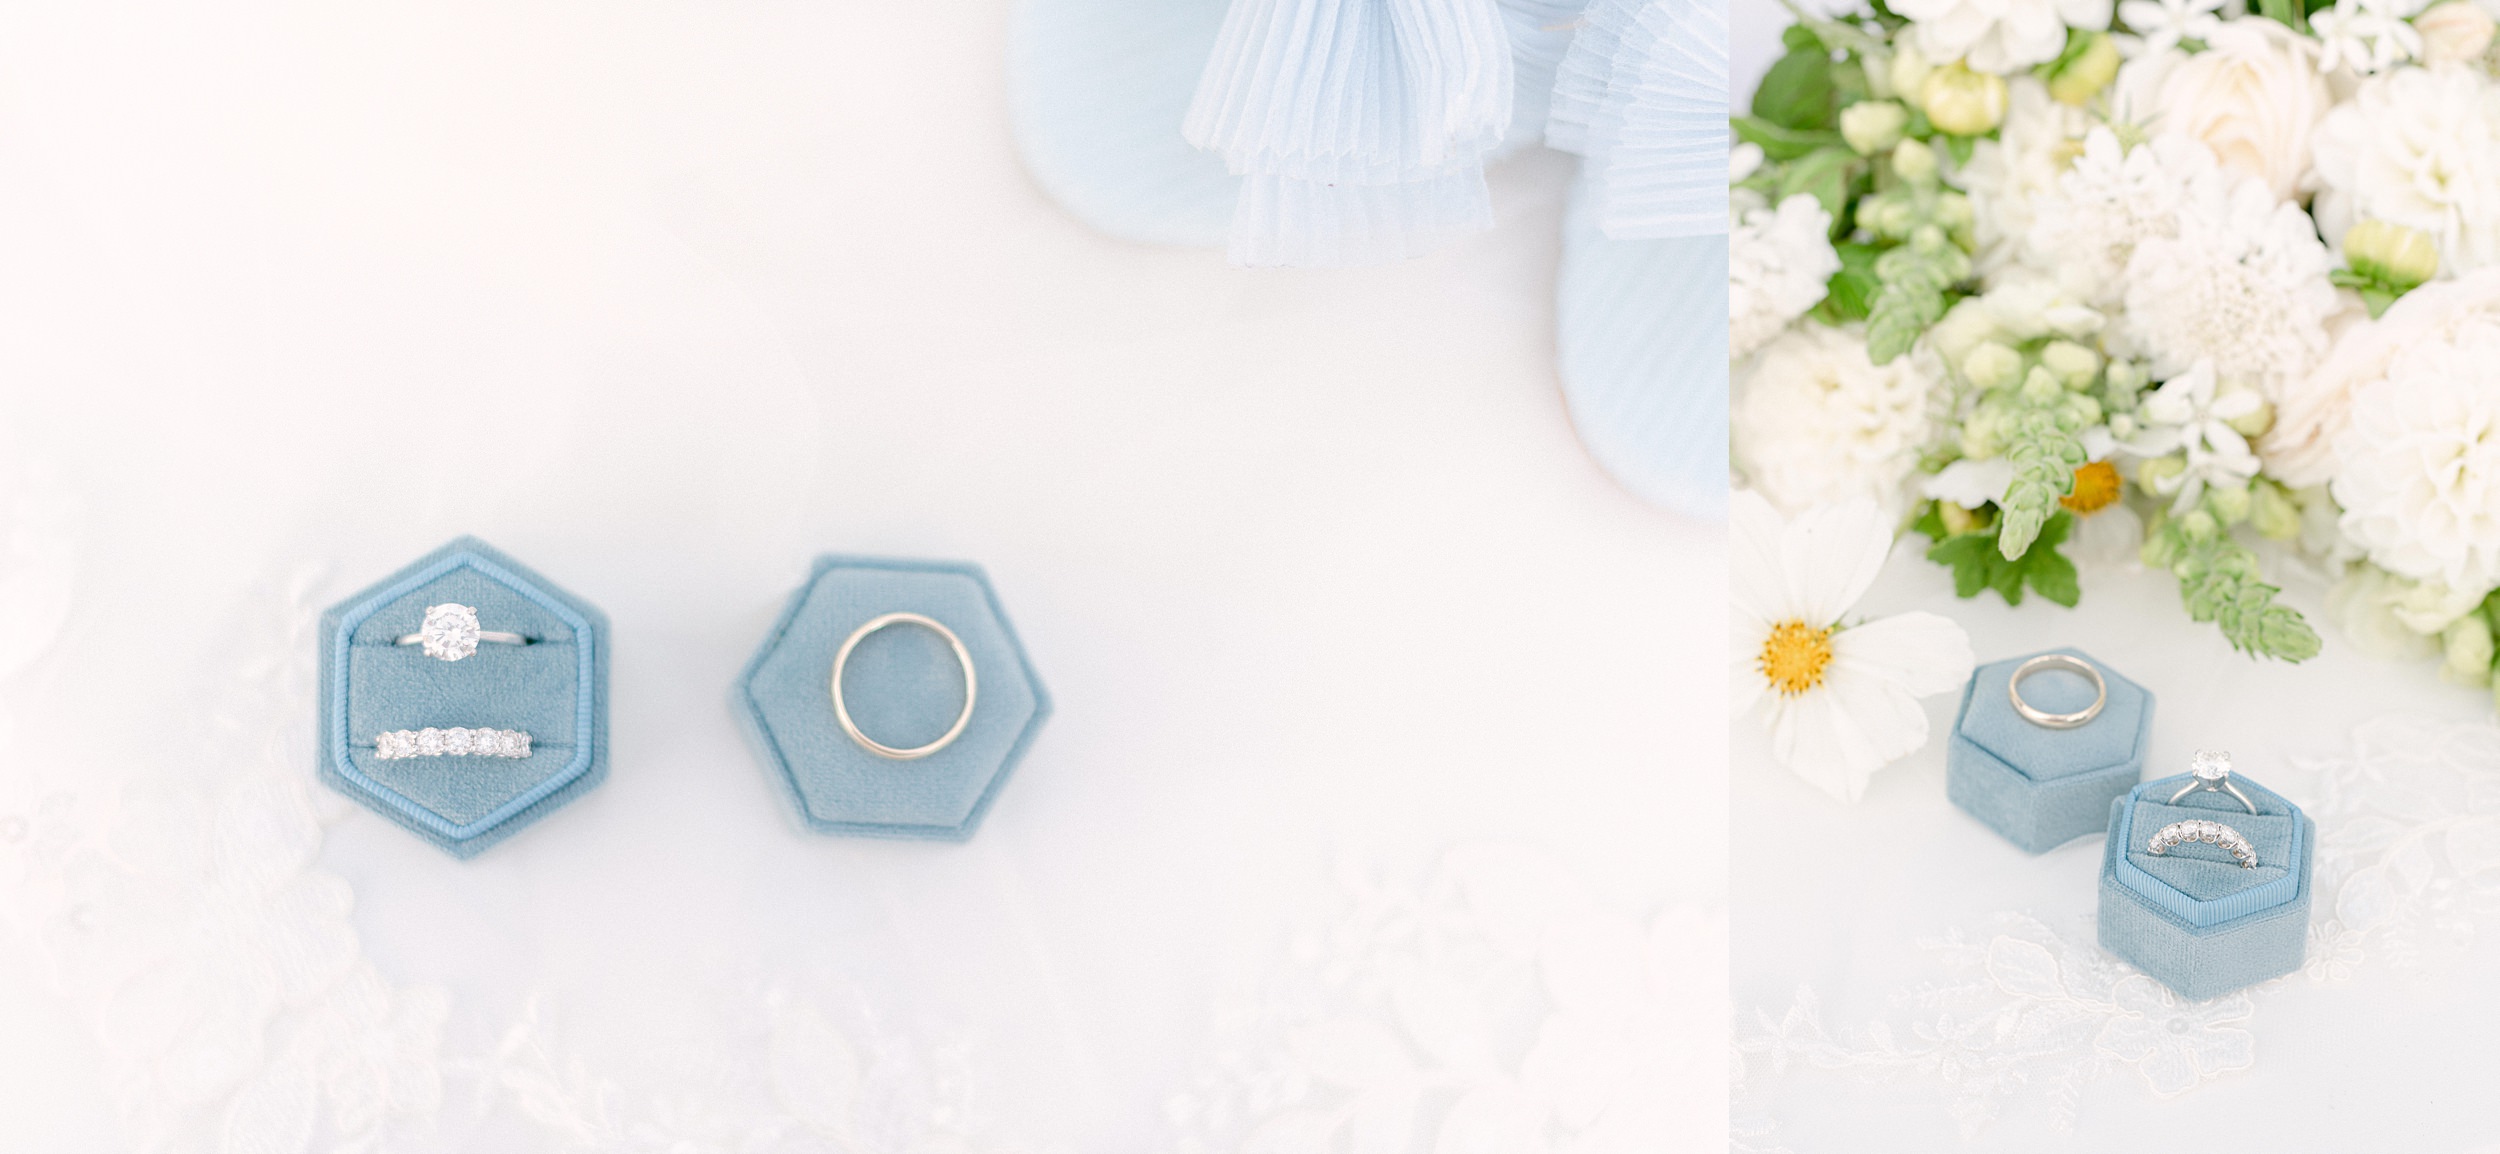 Fine Art Weddings in Seattle, The Sound Hotel. On the left in a light blue ring box on the bride's veil lace and her blue Loeffler Randall shoes peek out on the side of the image. On the right side, the rings and ring box are next to the bridal bouquet.